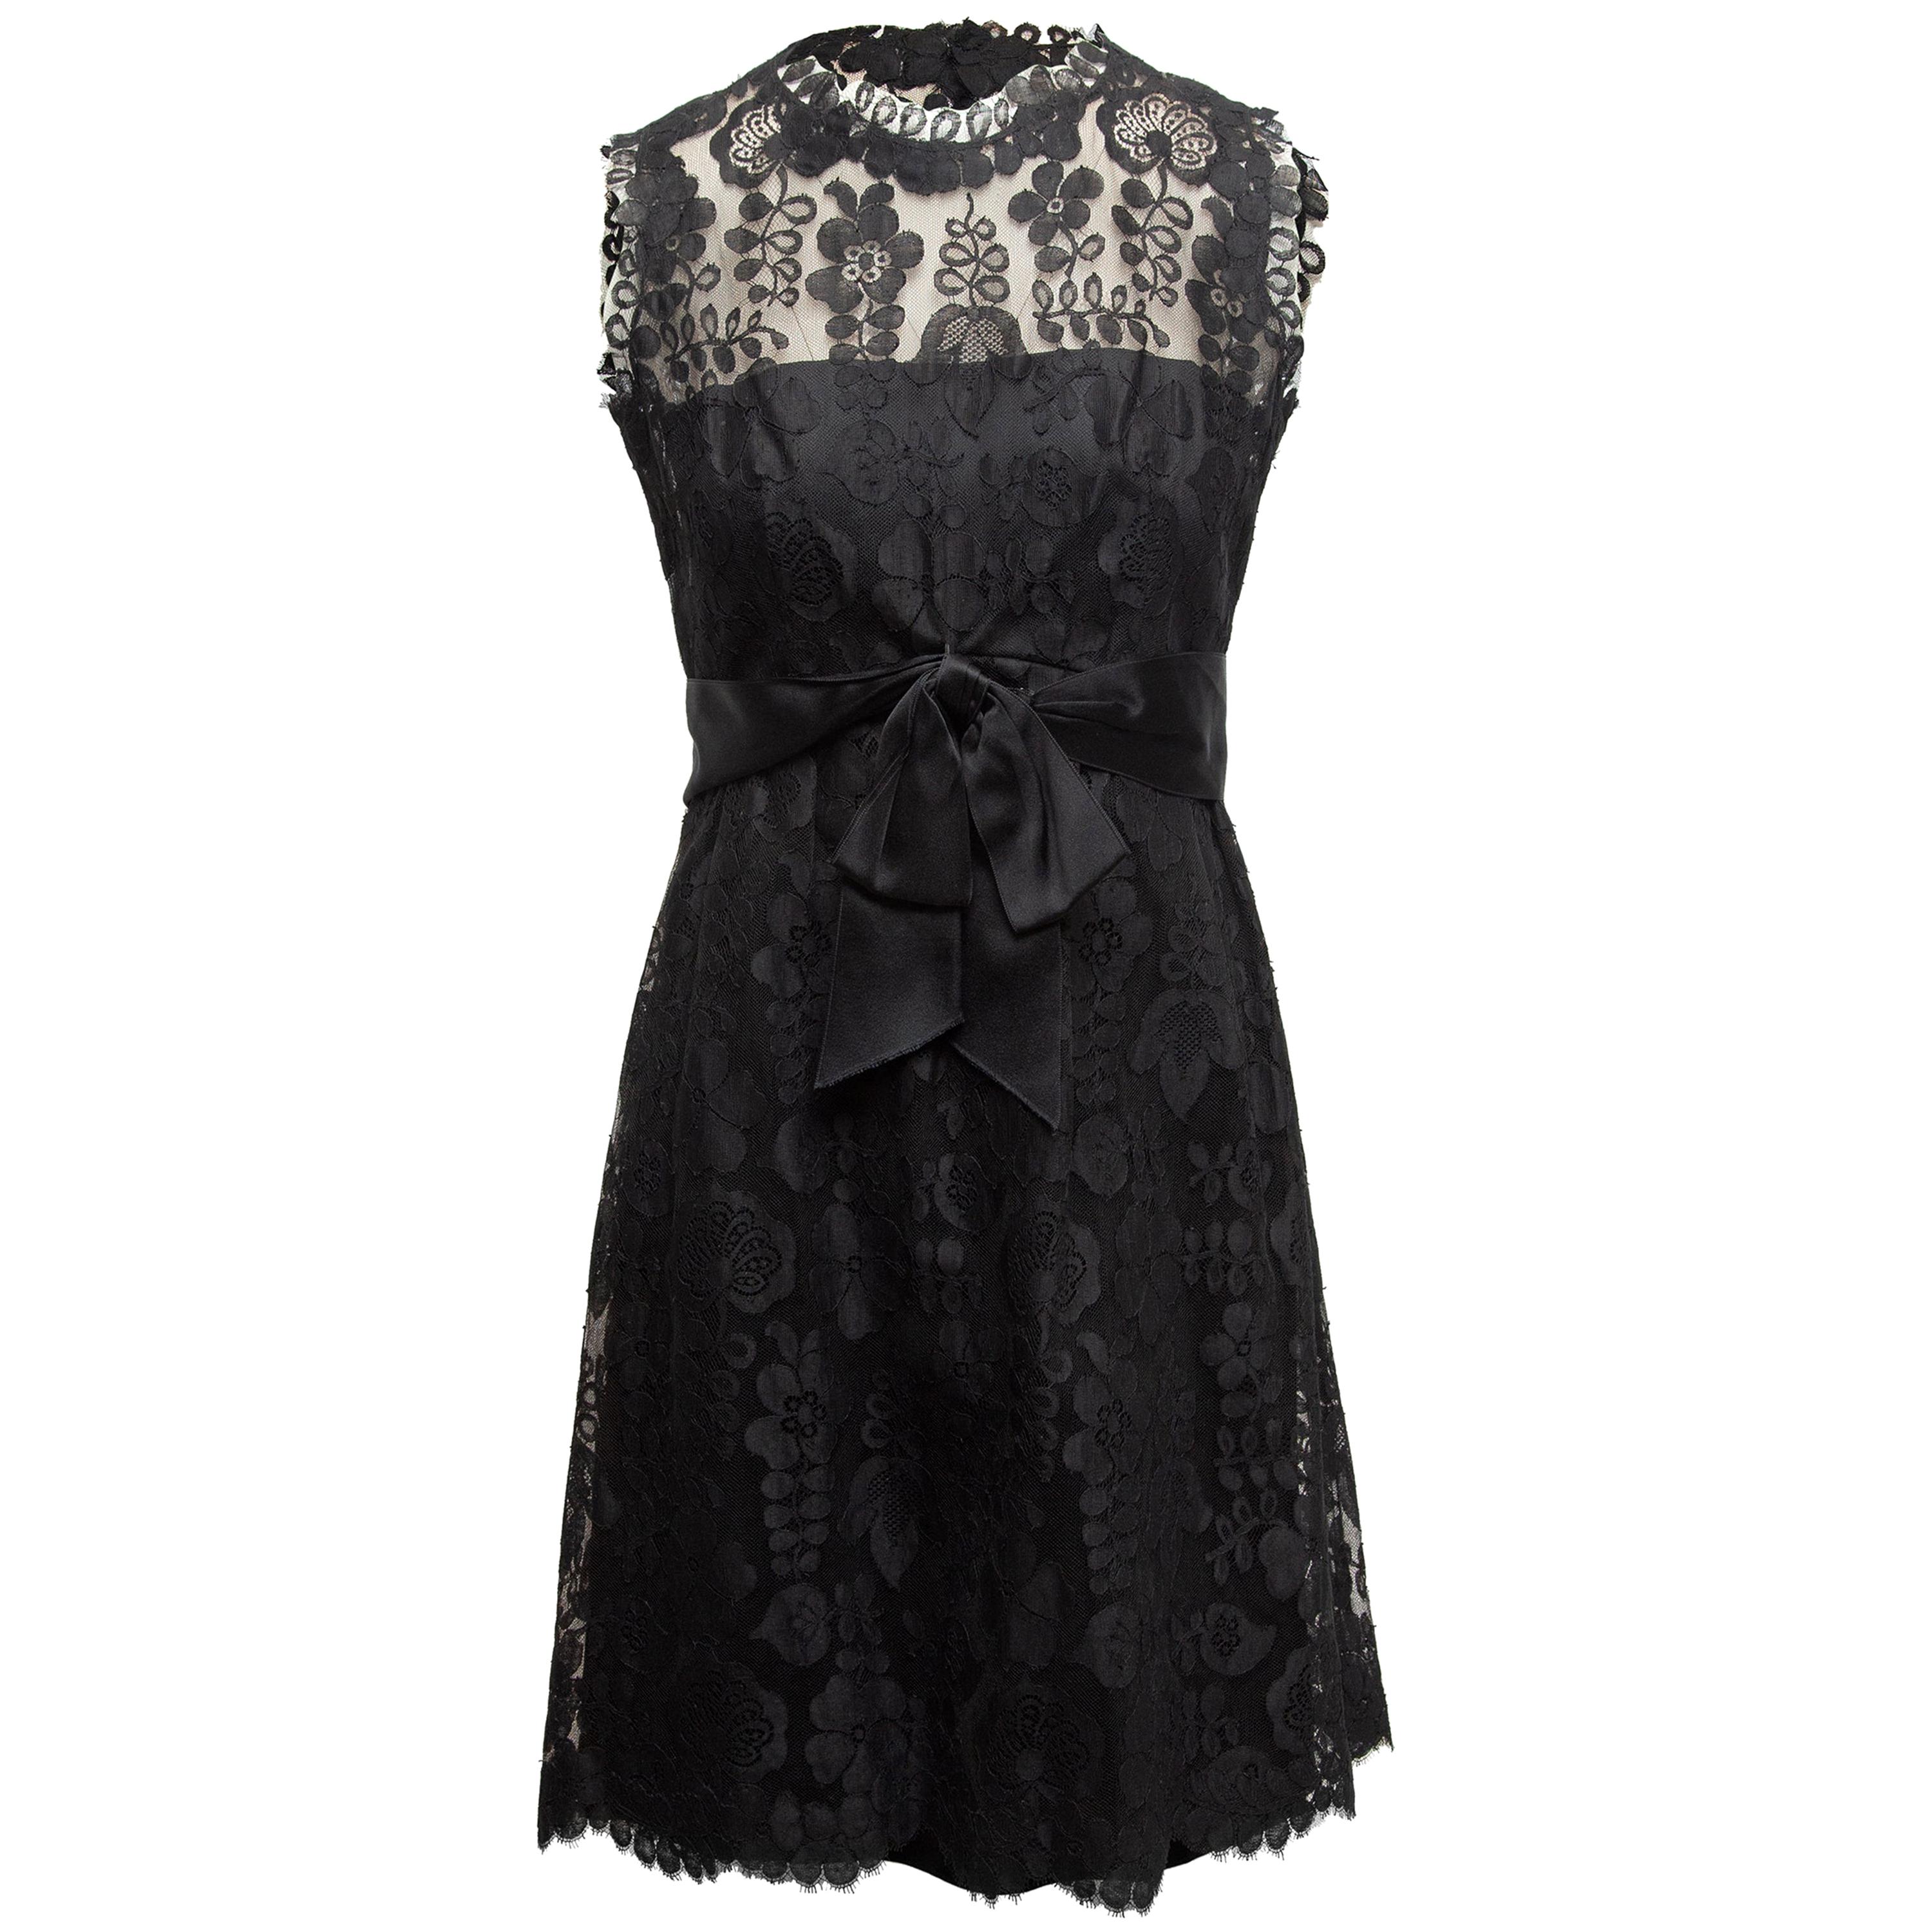 Adele Simpson Black Lace Sleeveless Dress For Sale at 1stDibs